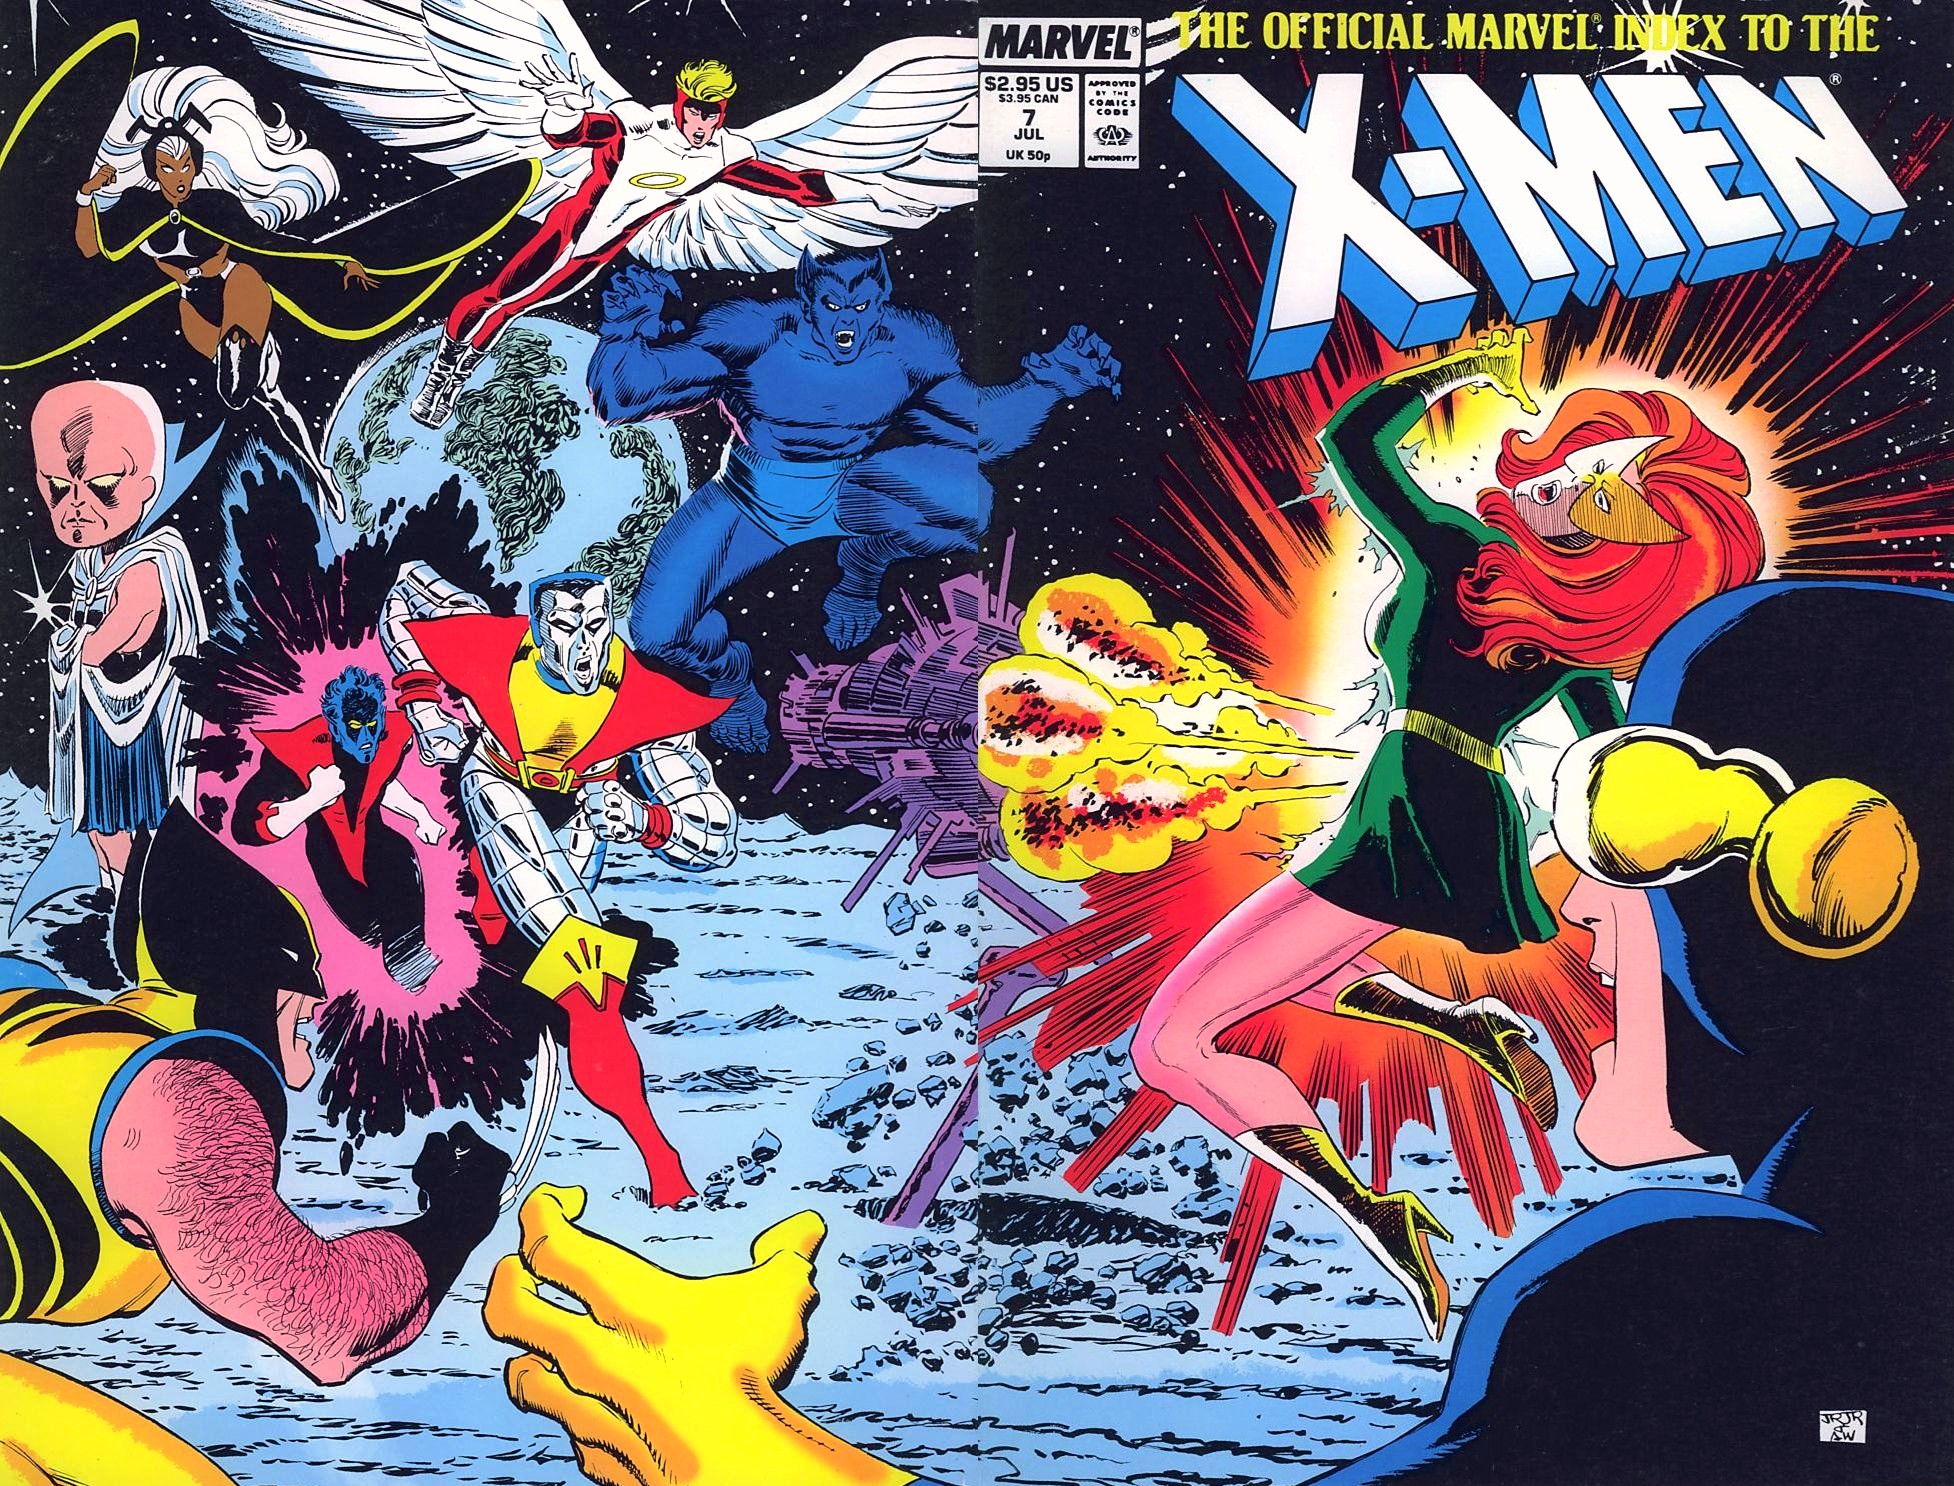 The Official Marvel Index To The X-Men (1987) 7 Page 1